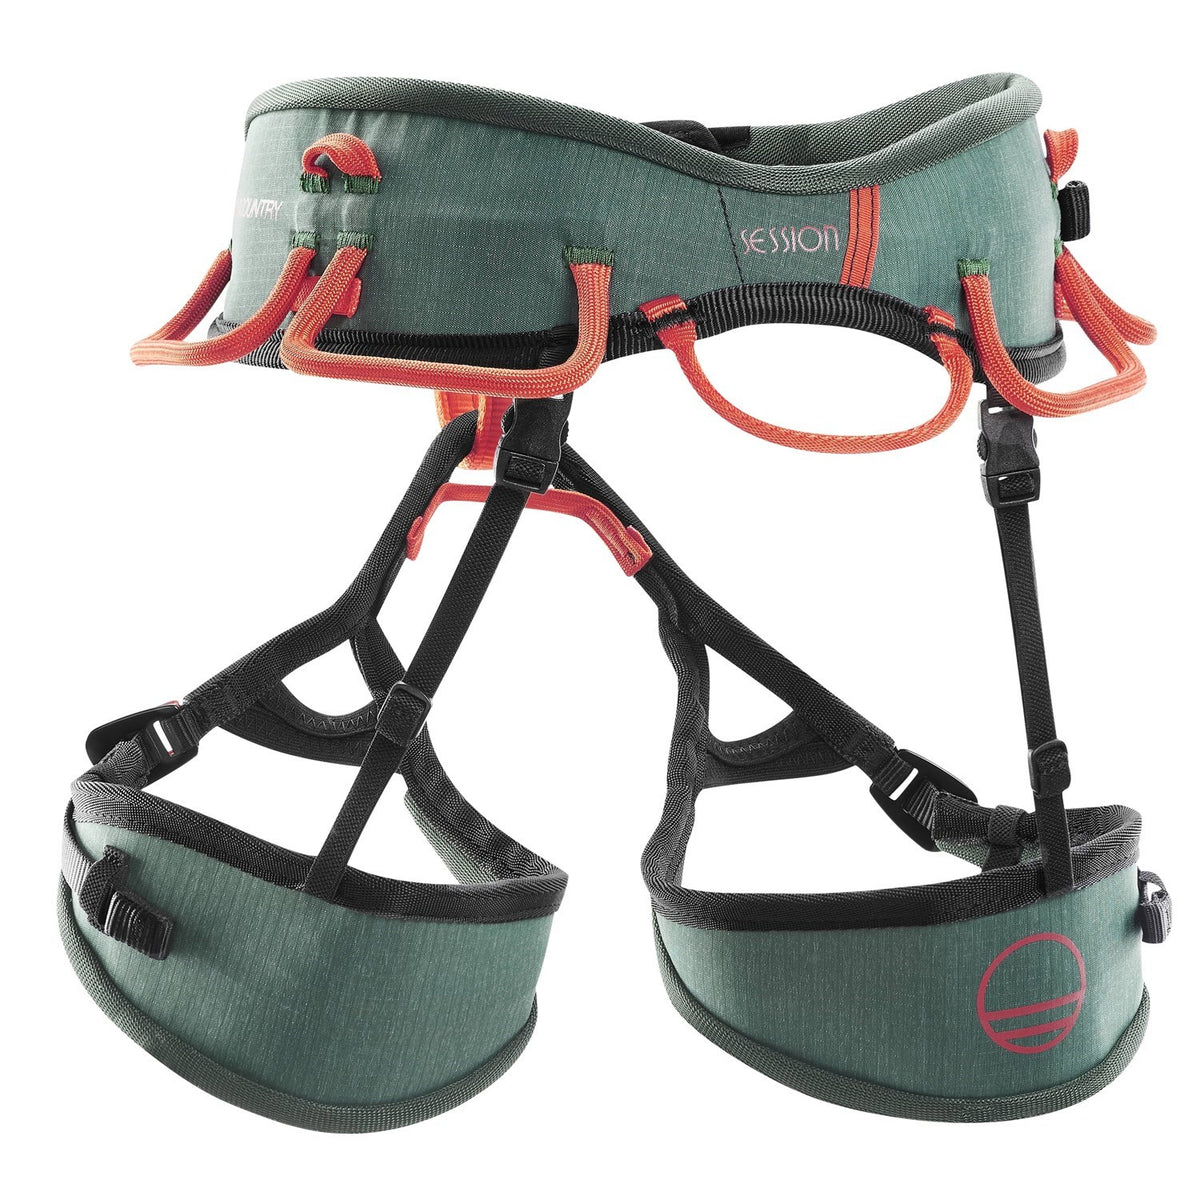 Wild Country Session Harness in green showing rear haul loop and gear loops